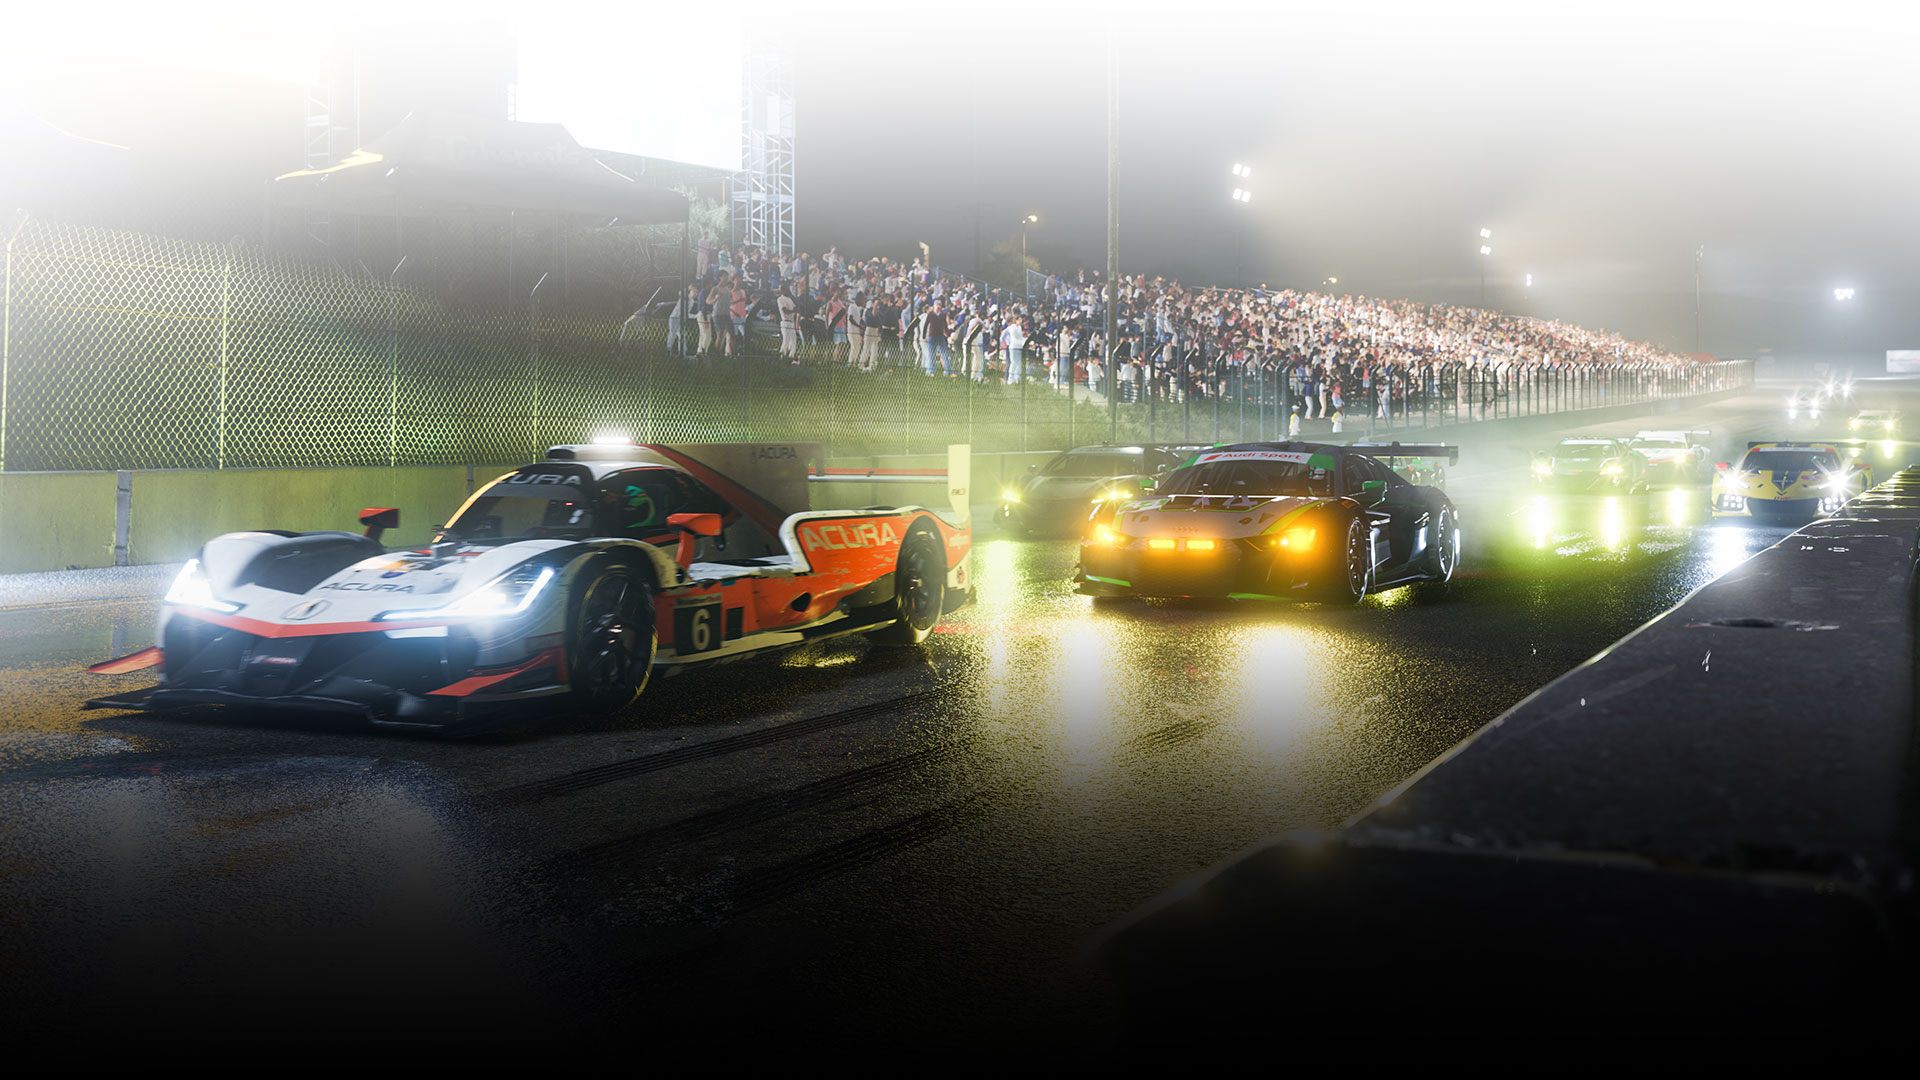 Racing cars line up on a wet racetrack at night.